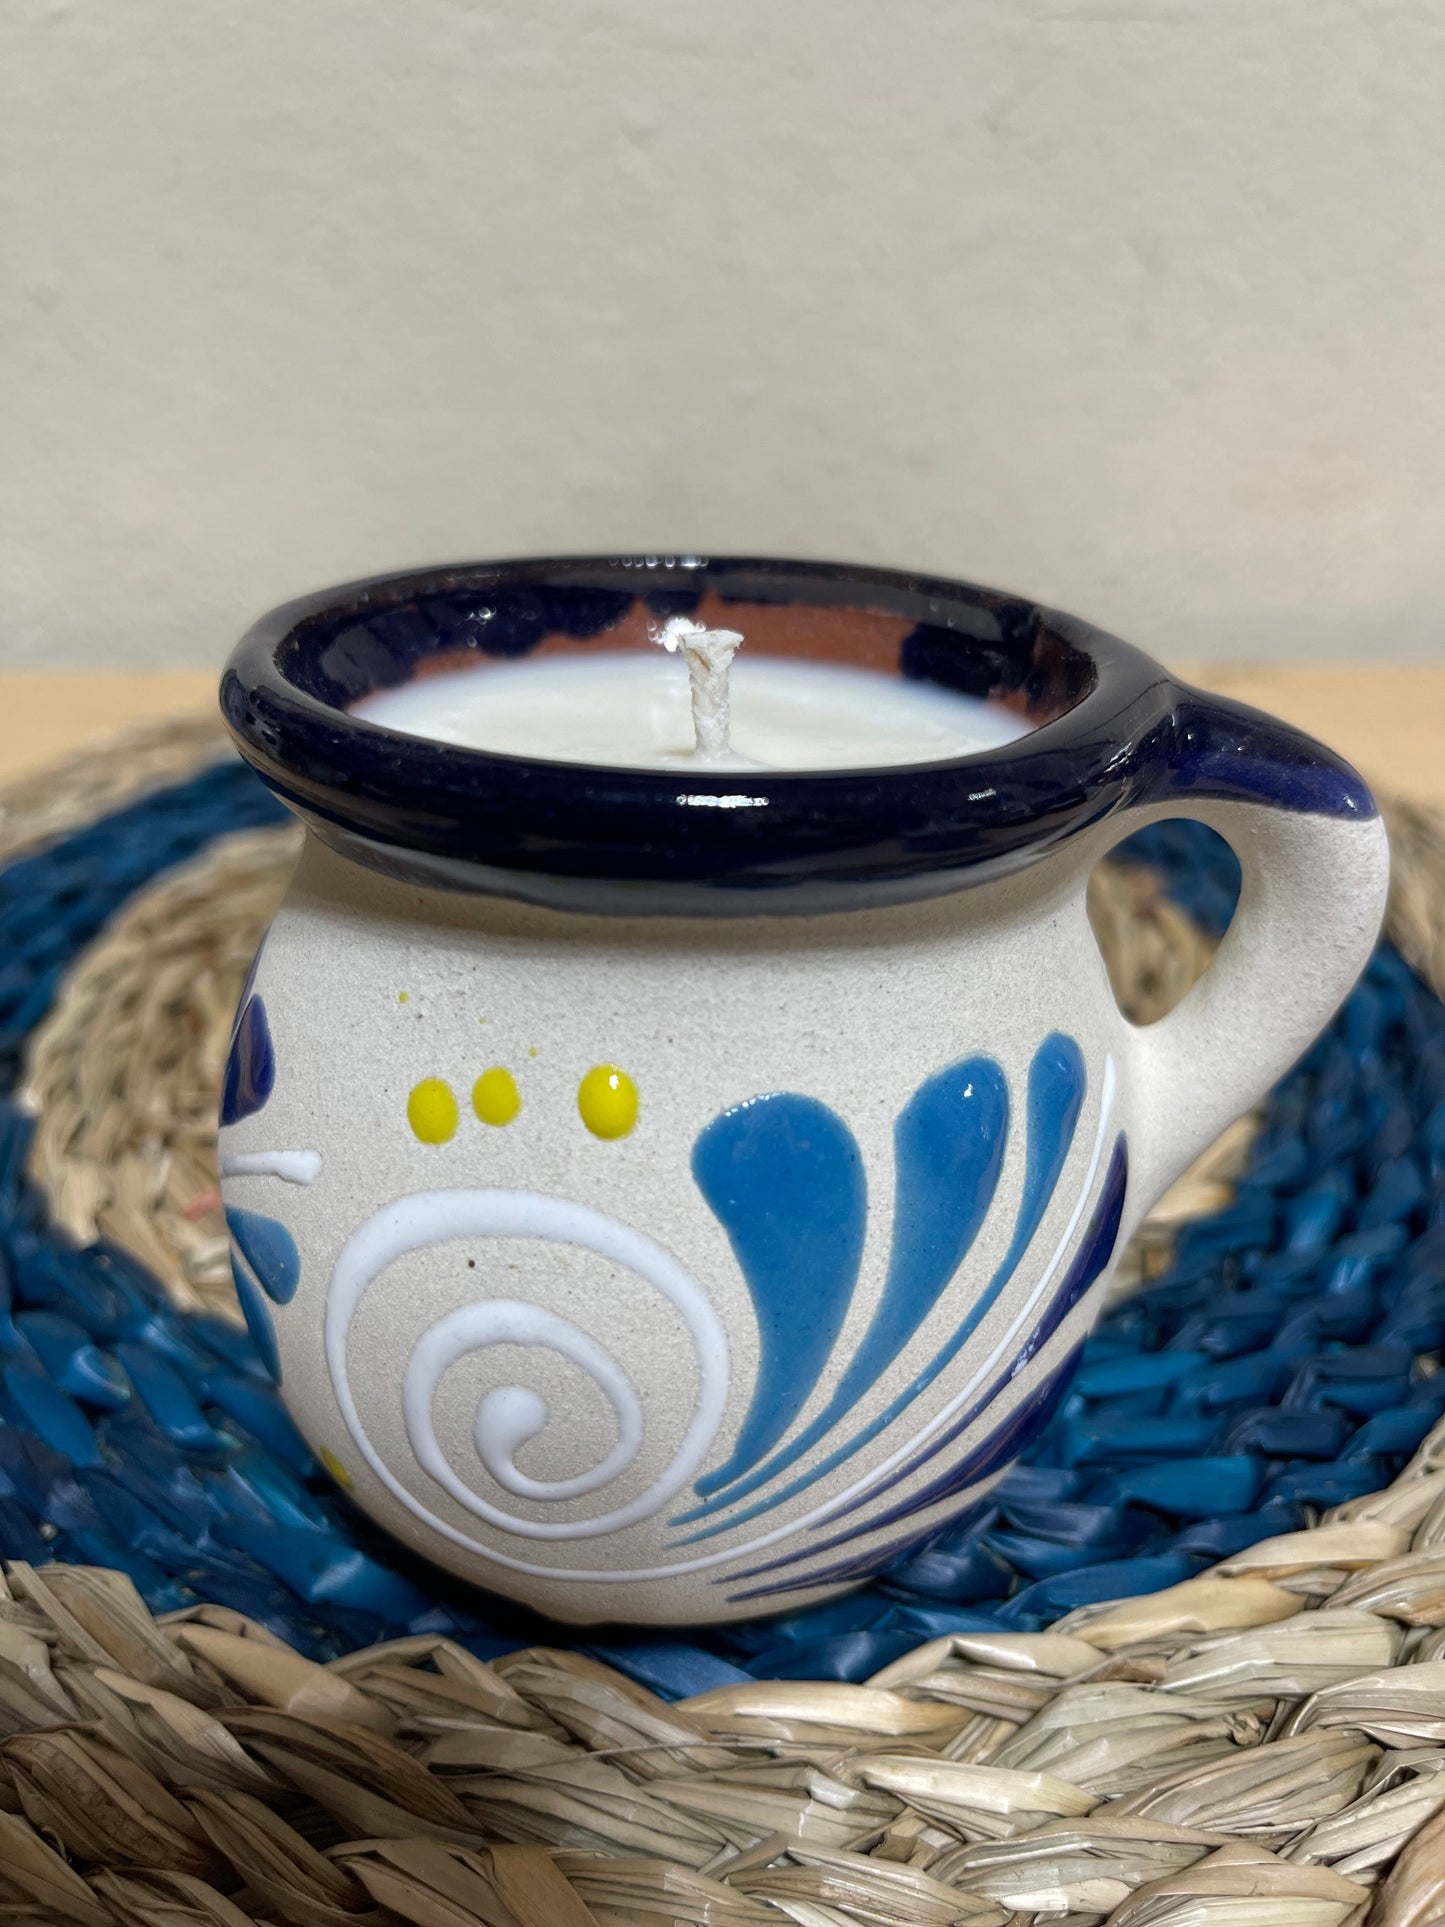 Jarrito Candle Brazilian Coffee Latte Scented Candle/Scented Mexican Candle/Hand-Poured/Soy Candle/Vela Café